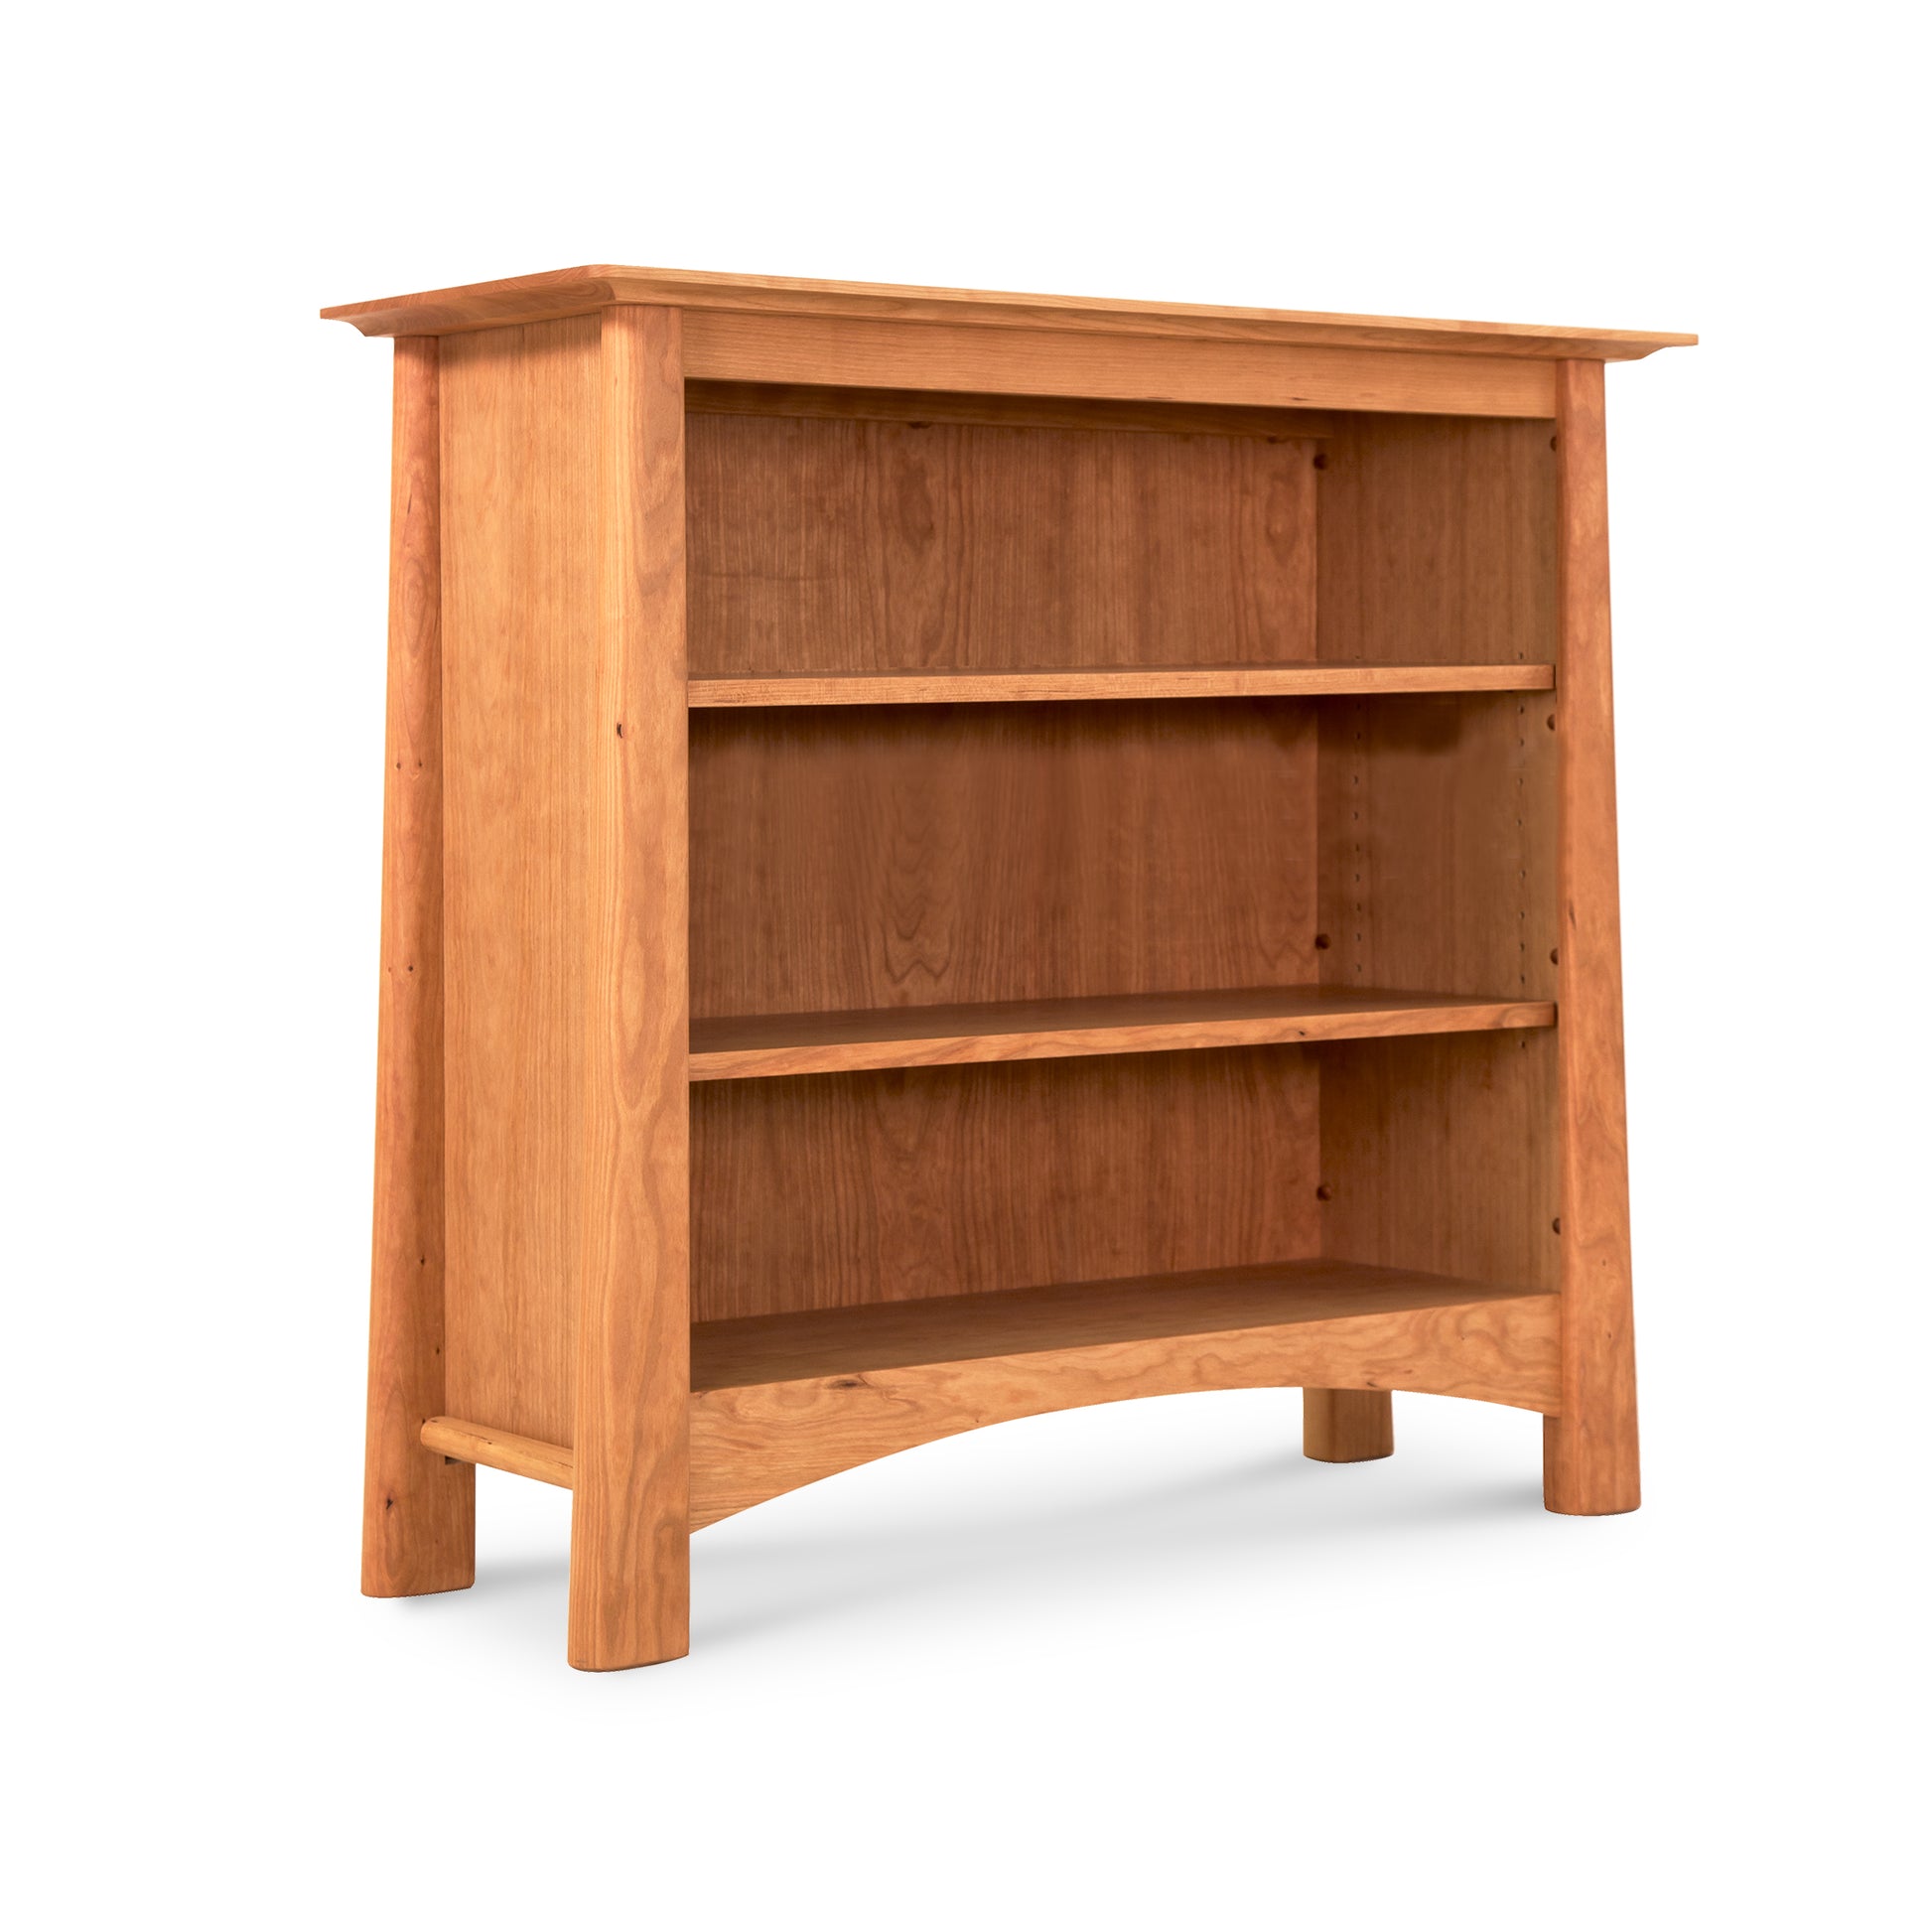 Maple Corner Woodworks Cherry Moon Bookcase with three tiers, isolated on a white background, crafted from sustainably harvested hardwoods.